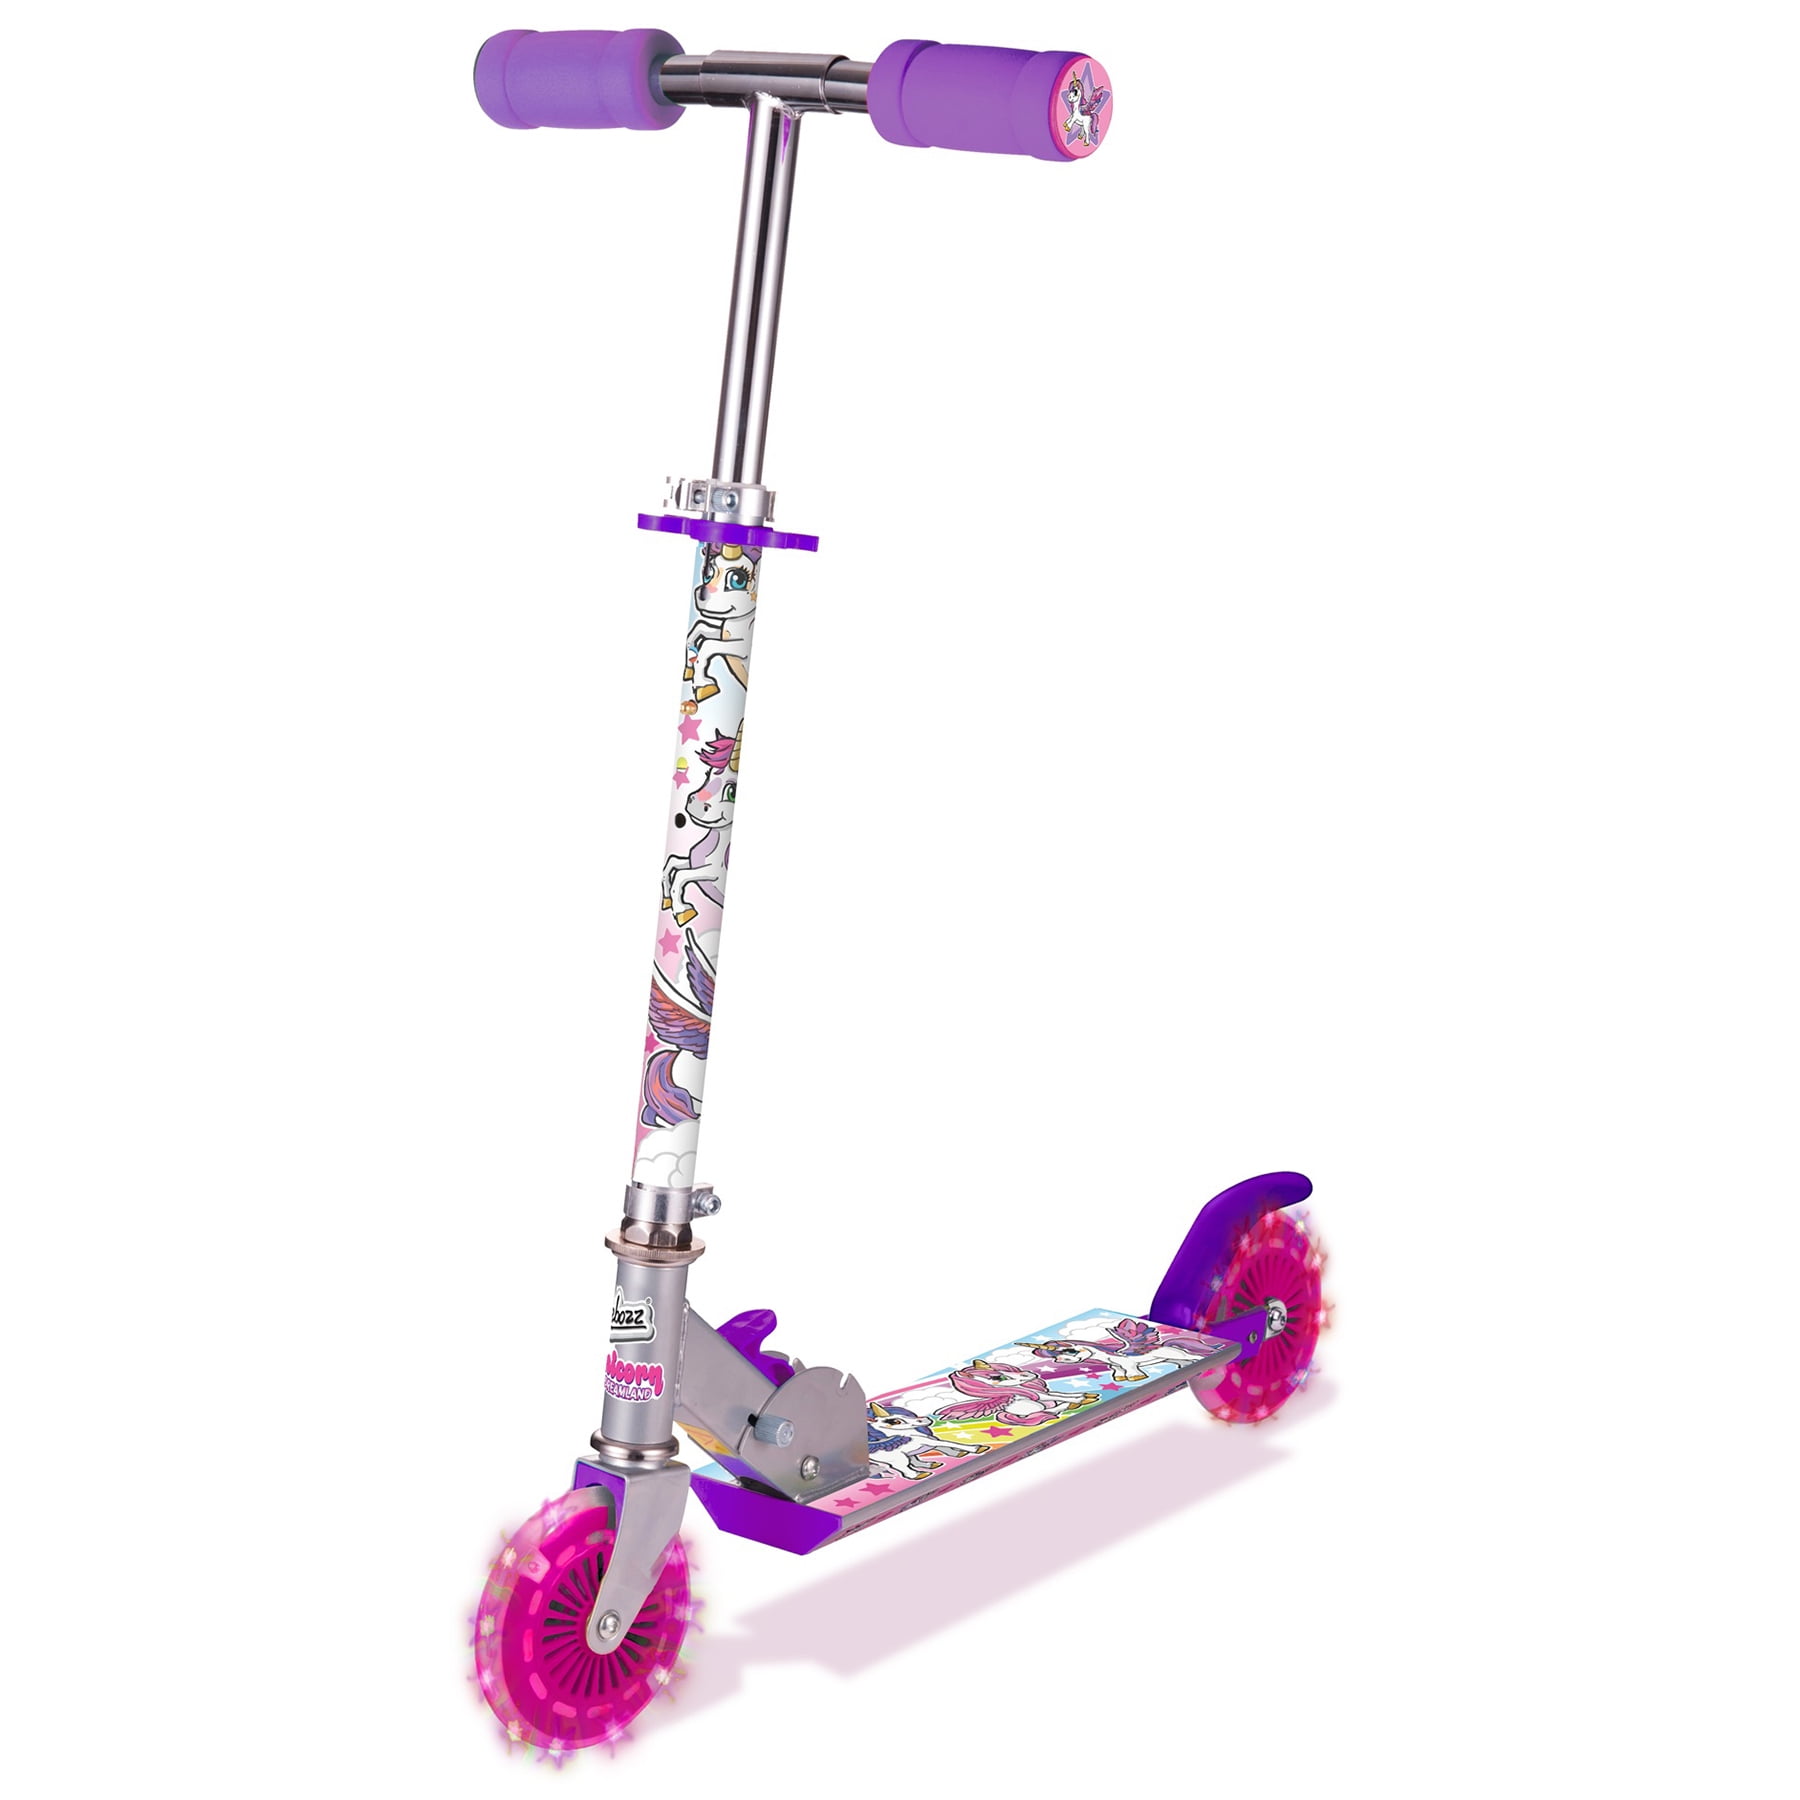 My First Balance Bike Ozbozz Height adjustable Pink or Blue Age 3 plus 